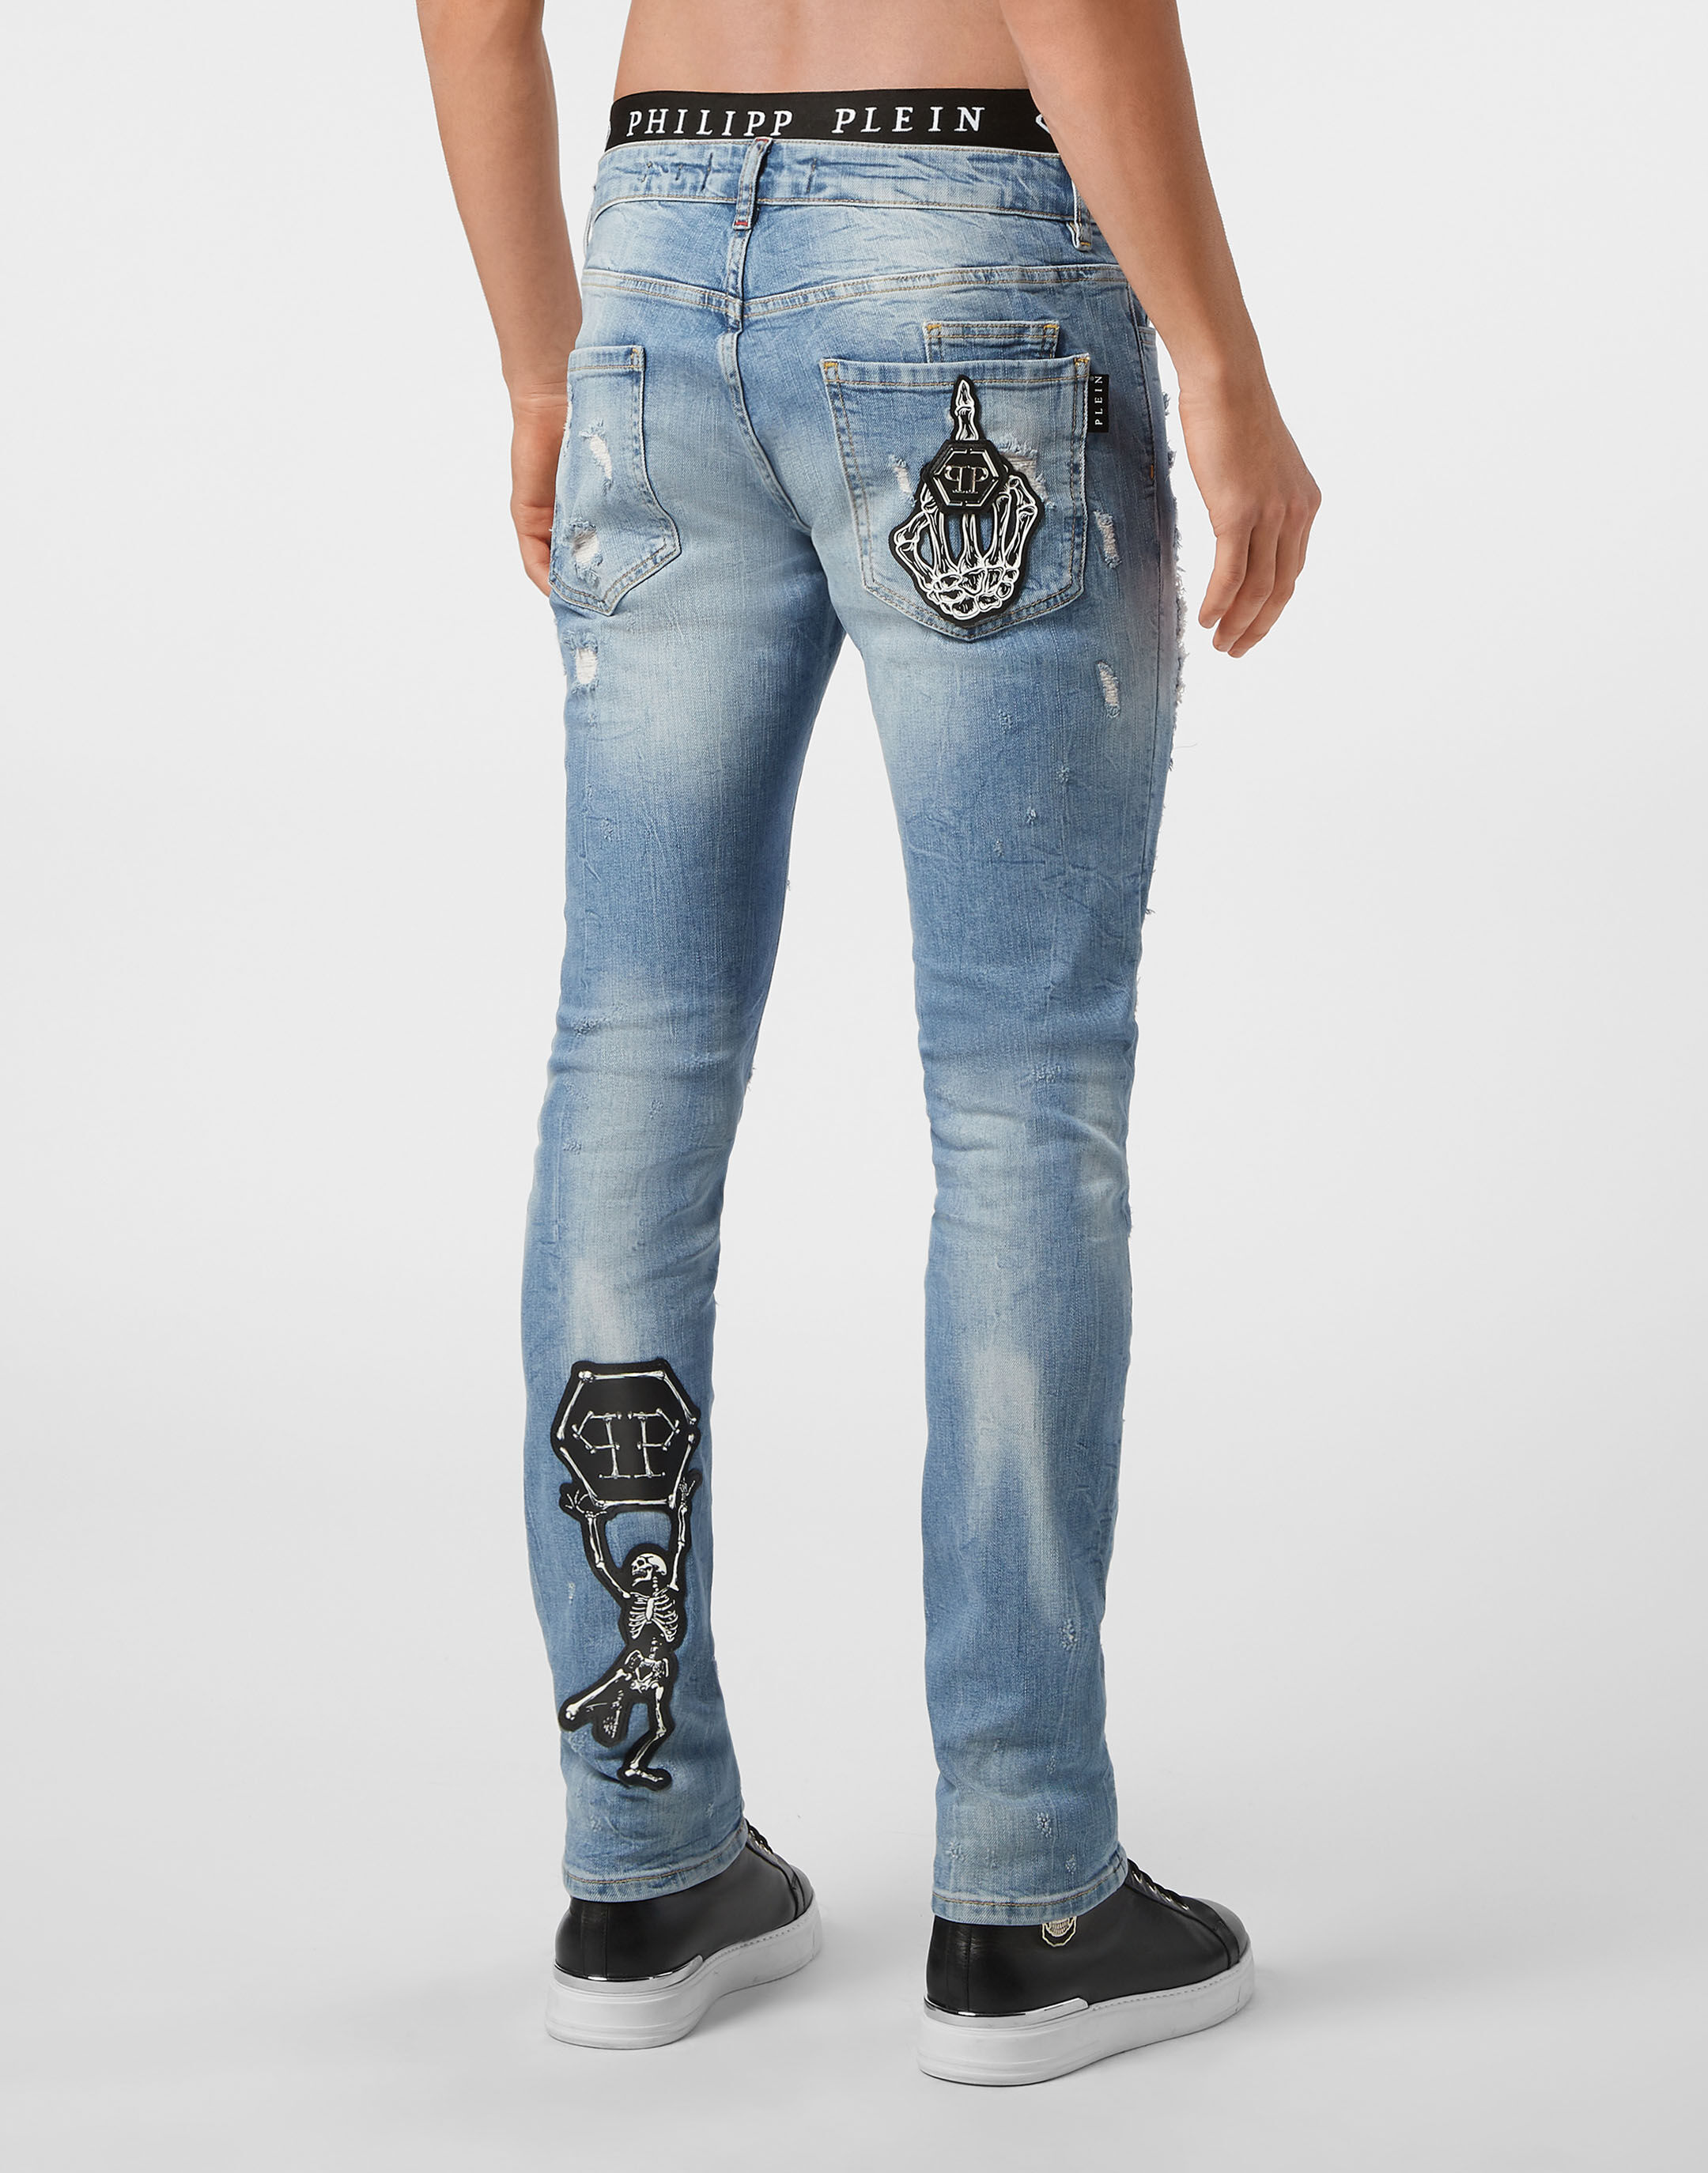 philipp plein jeans price in south africa